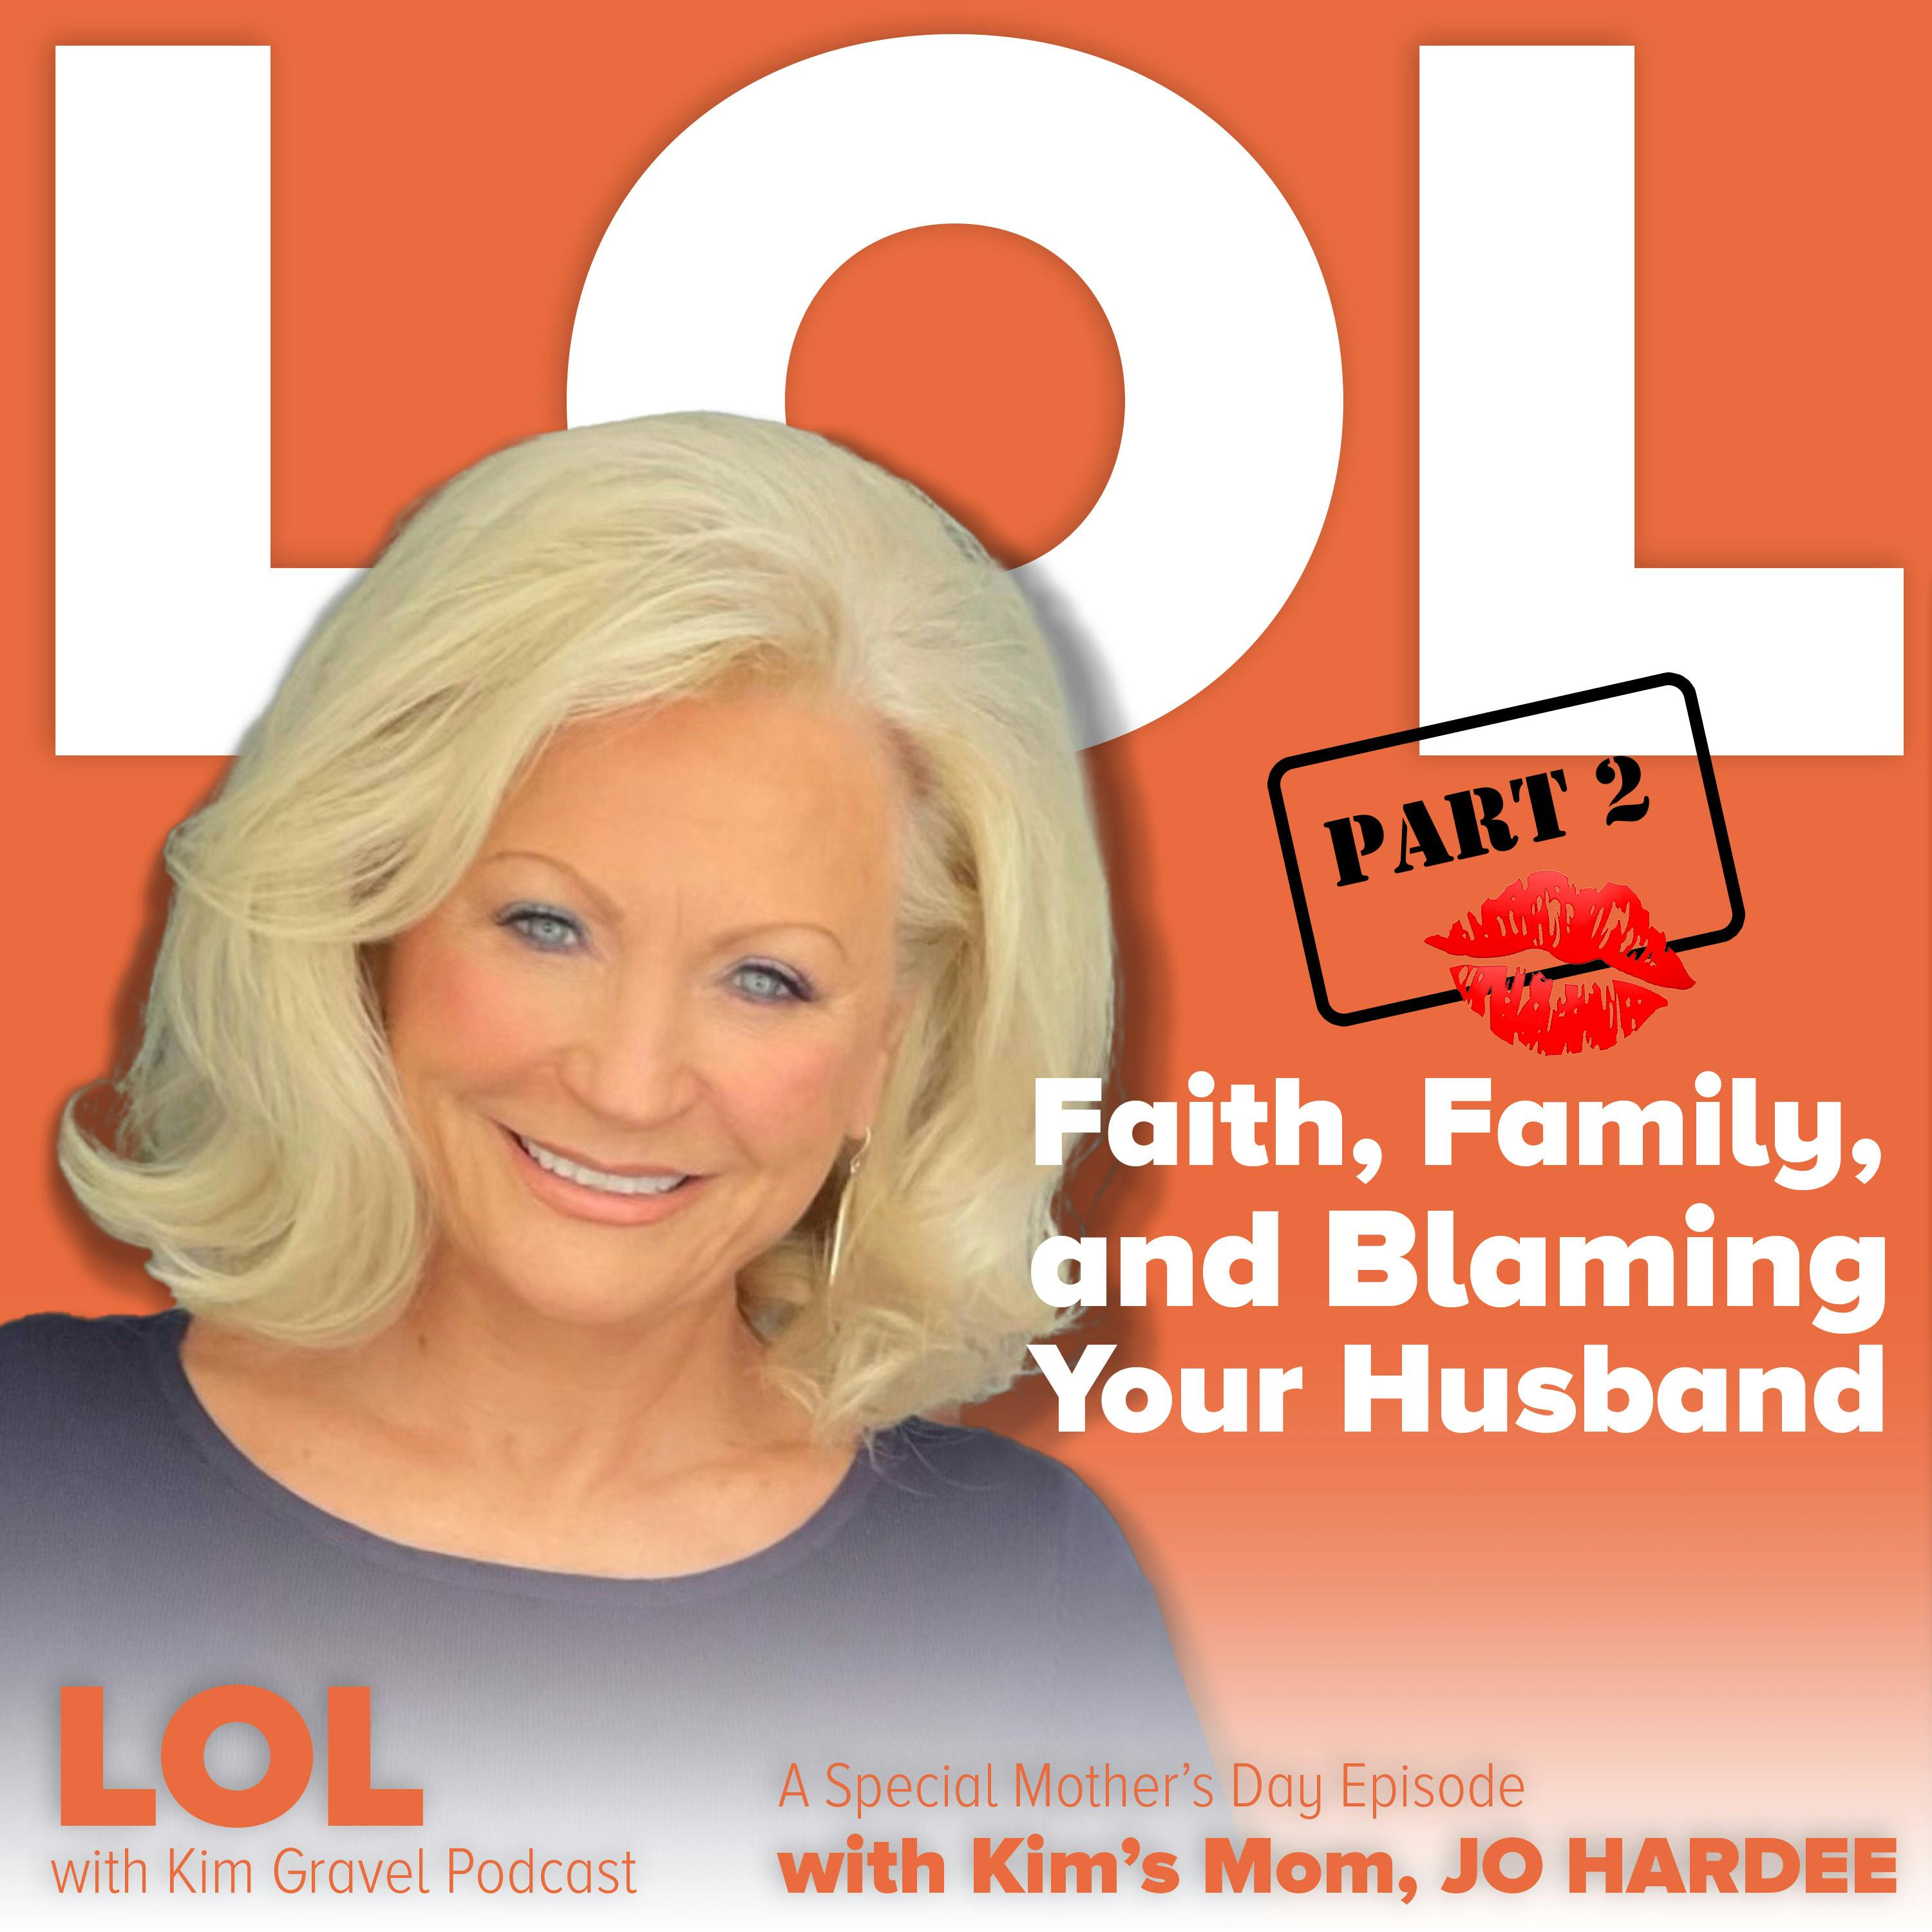 Part 2: Faith, Family and Blaming Your Husband | A Special Mother’s Day Episode with Kim’s Mom, Jo Hardee